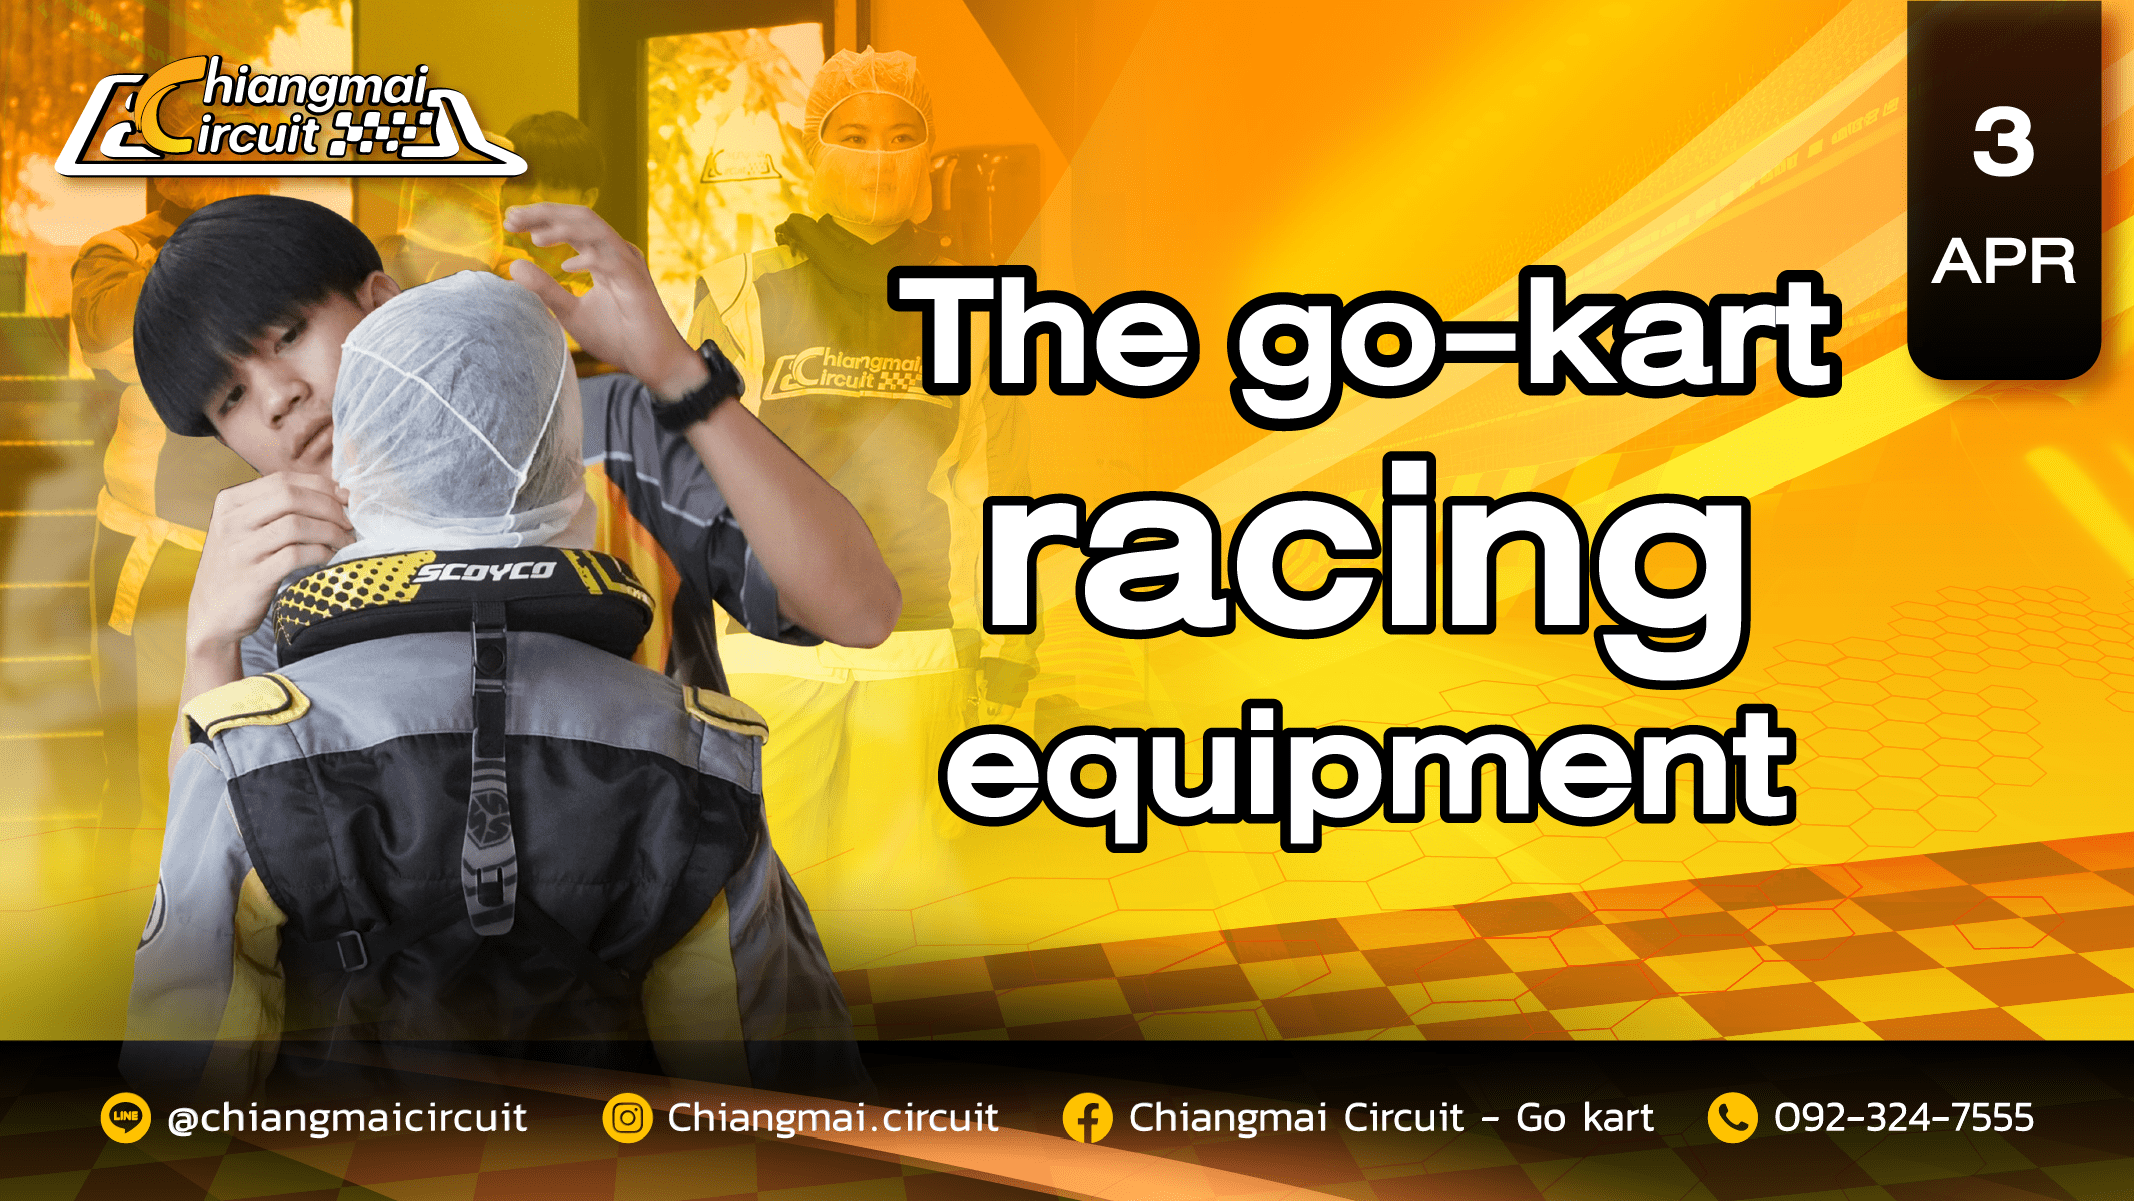 The go-kart racing equipment that racers use when driving go-karts.